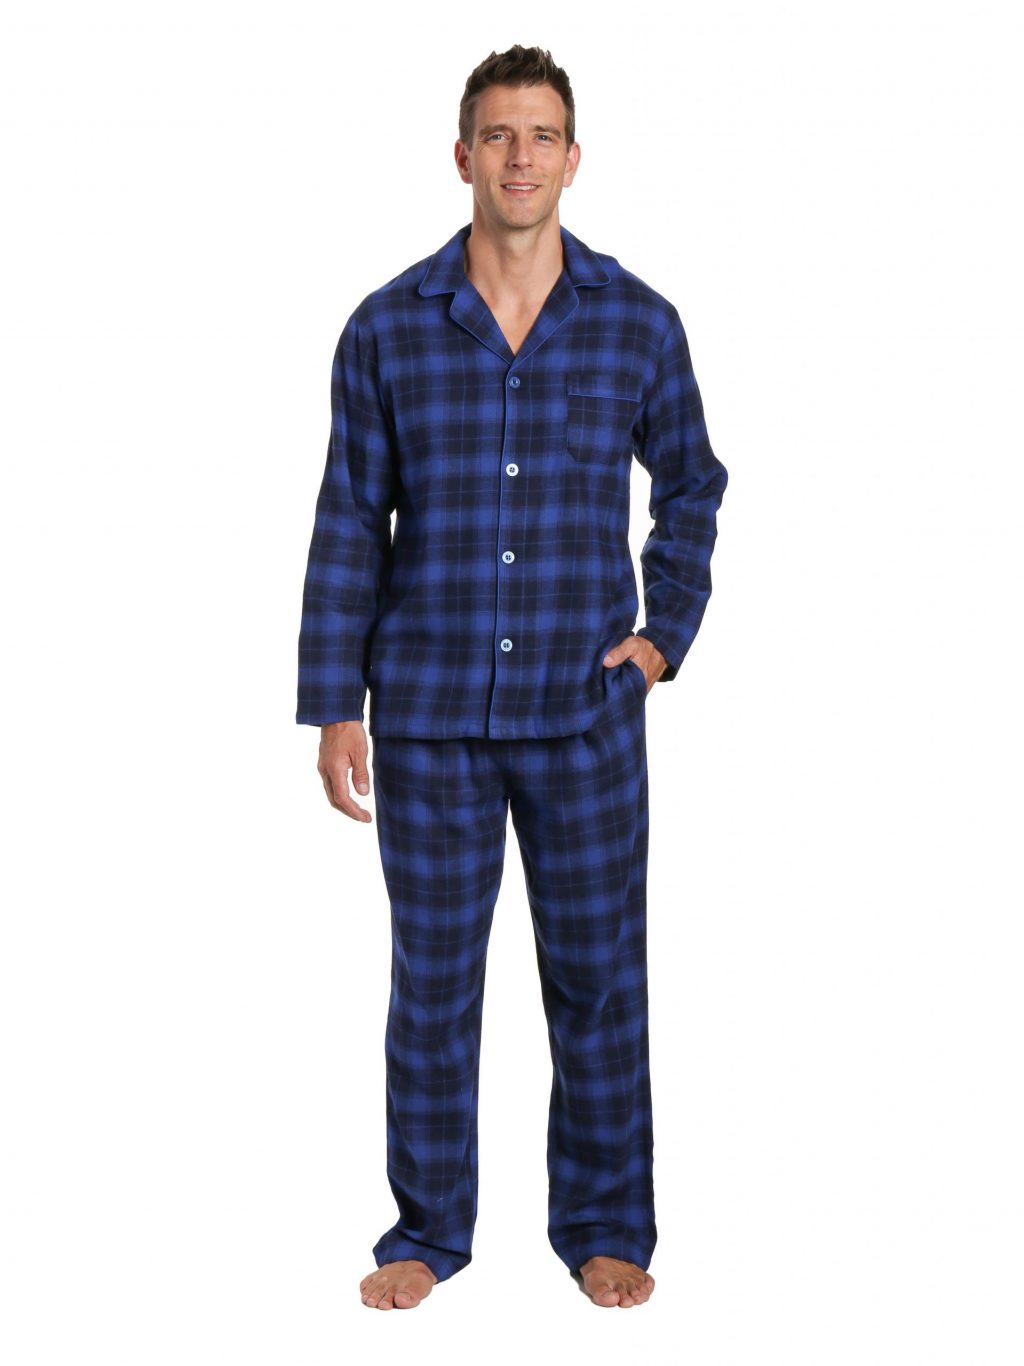 Mens Flannel Cotton Lounging Pants Pajamas Sets Is Great For Keeping ...